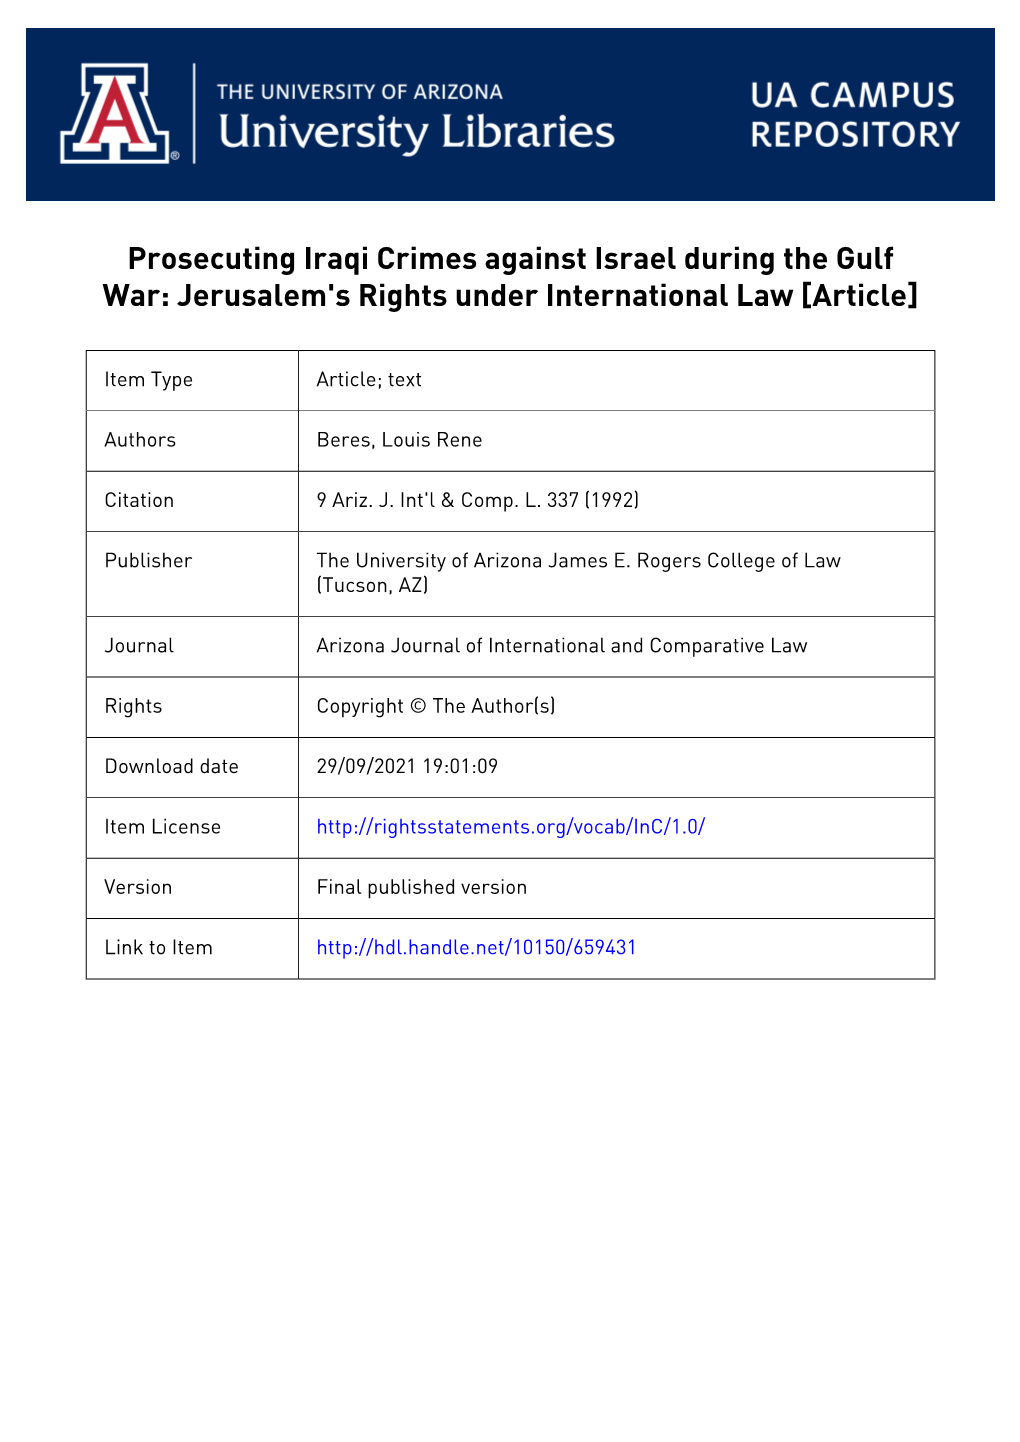 Prosecuting Iraqi Crimes Against Israel During the Gulf War: Jerusalem's Rights Under International Law [Article]